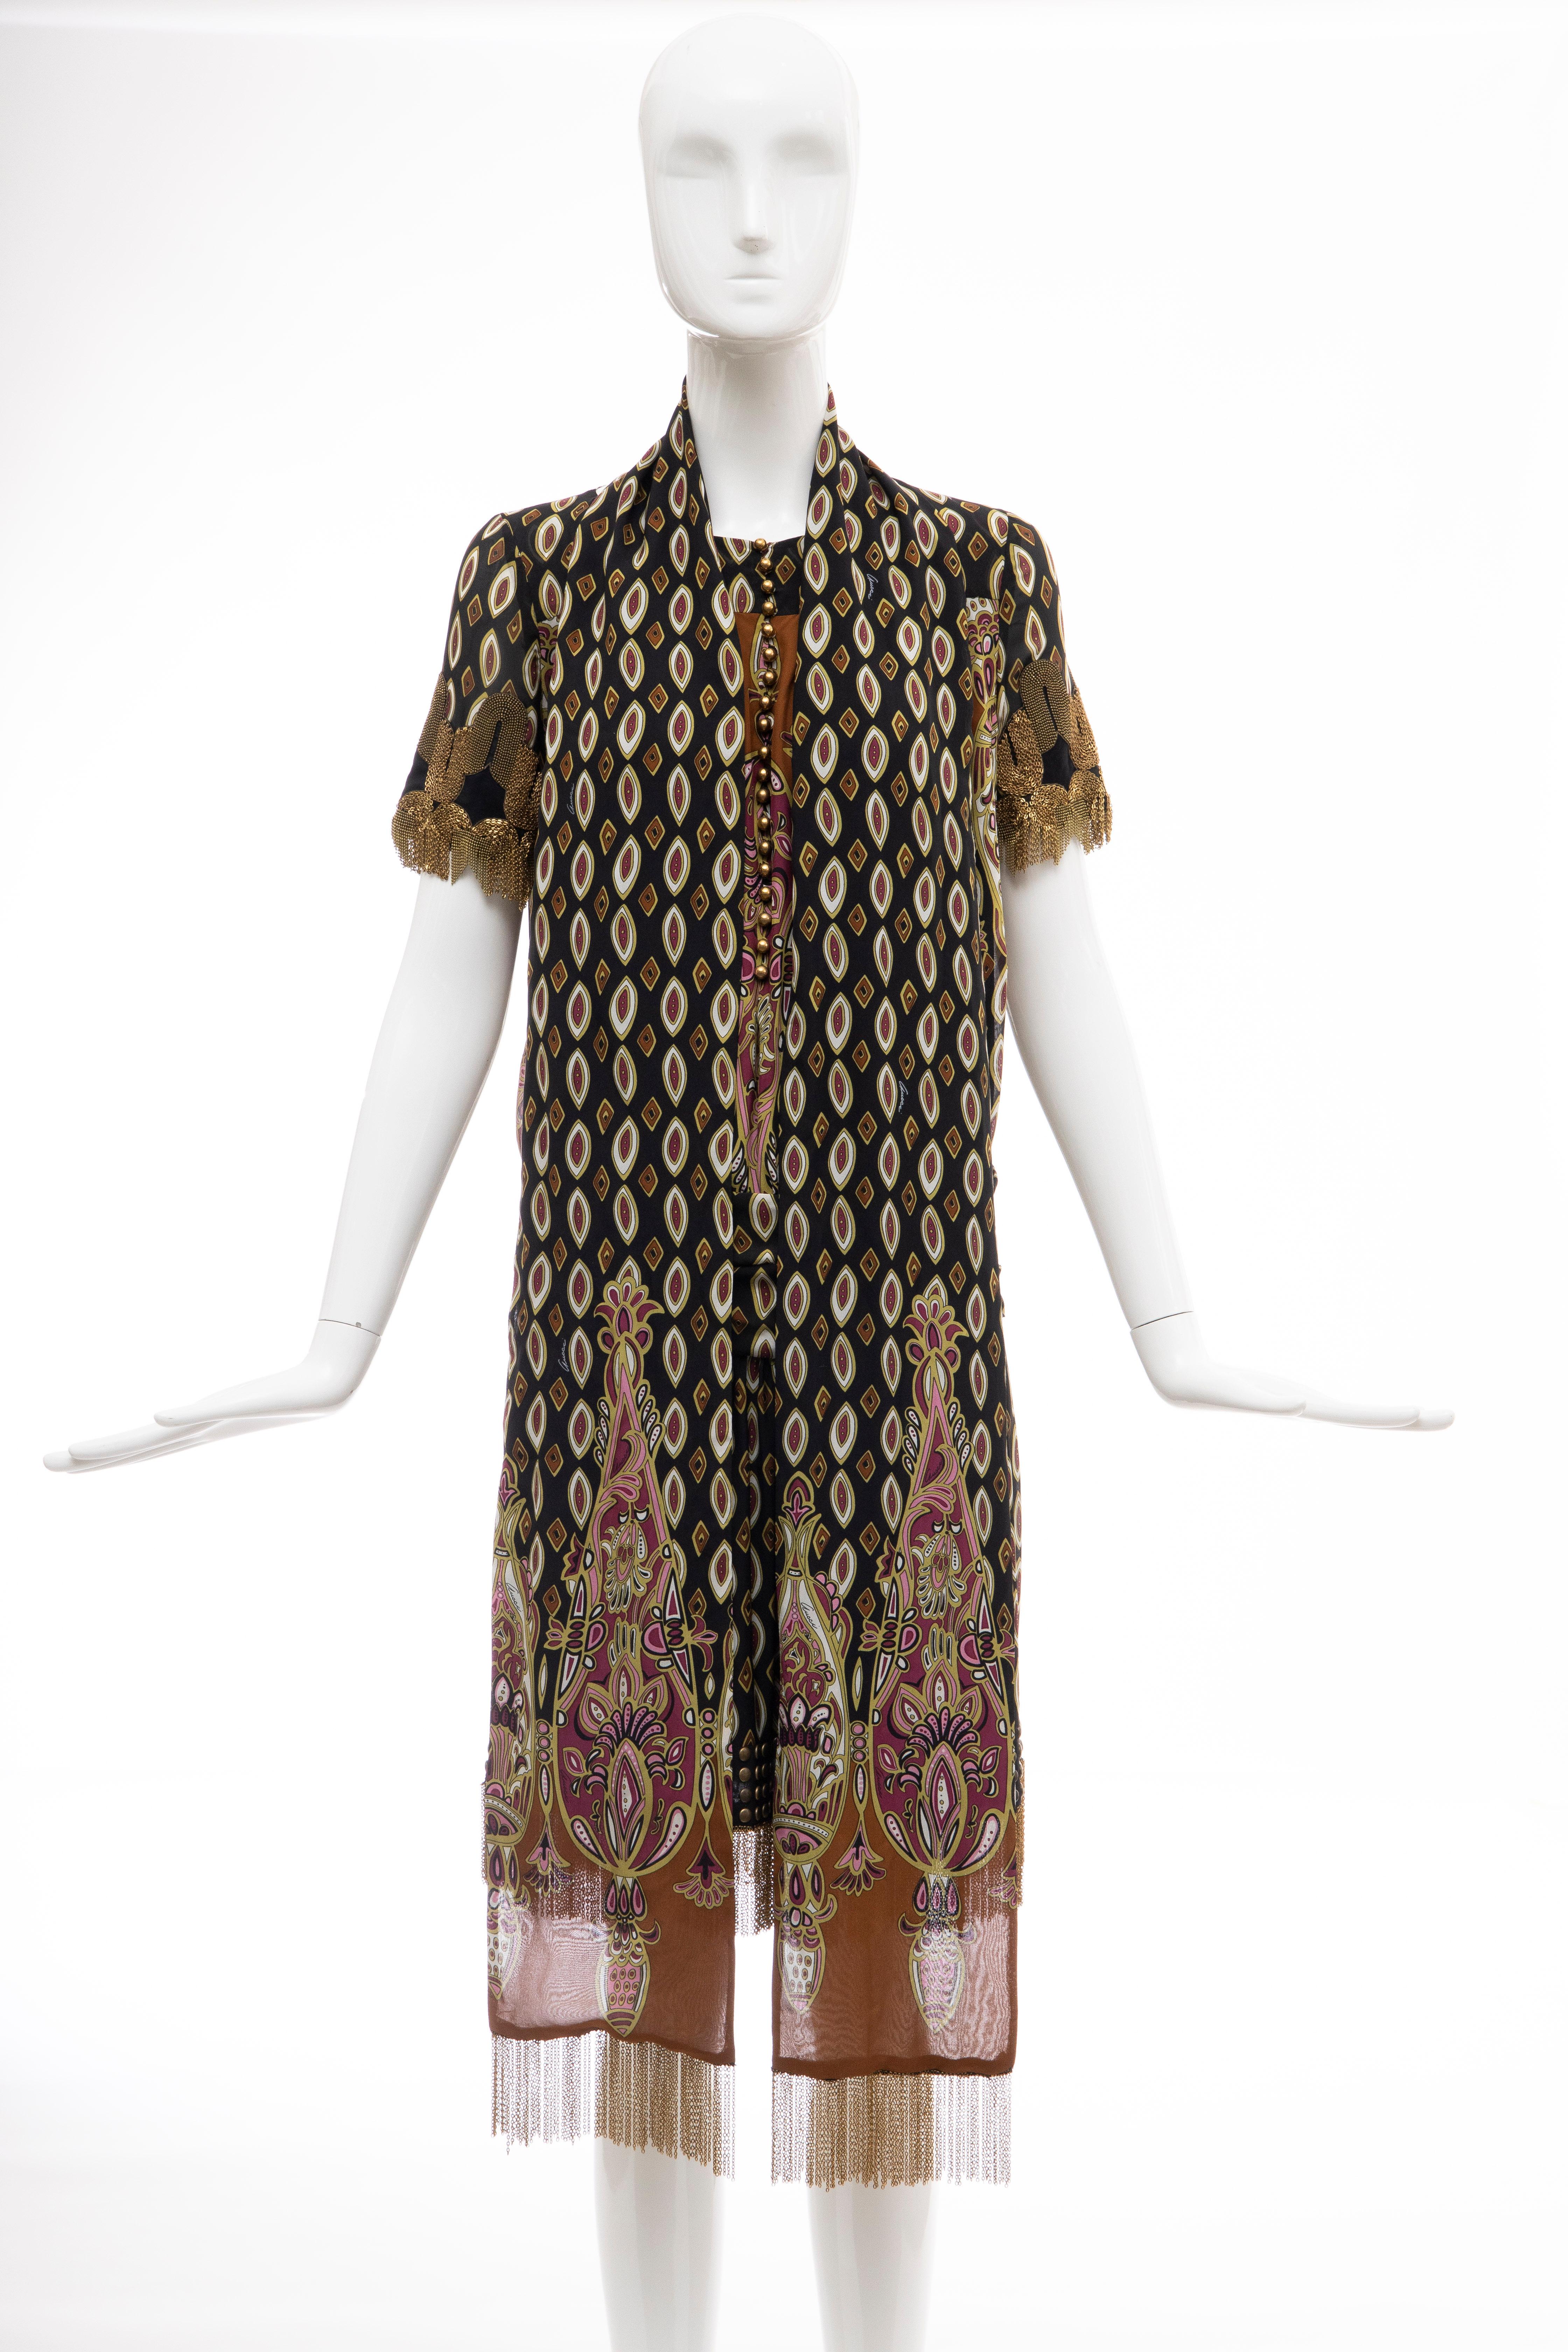 Frida Giannini for Gucci Runway Silk Boteh Pattern Brass Chains Dress, Fall 2008 For Sale 9